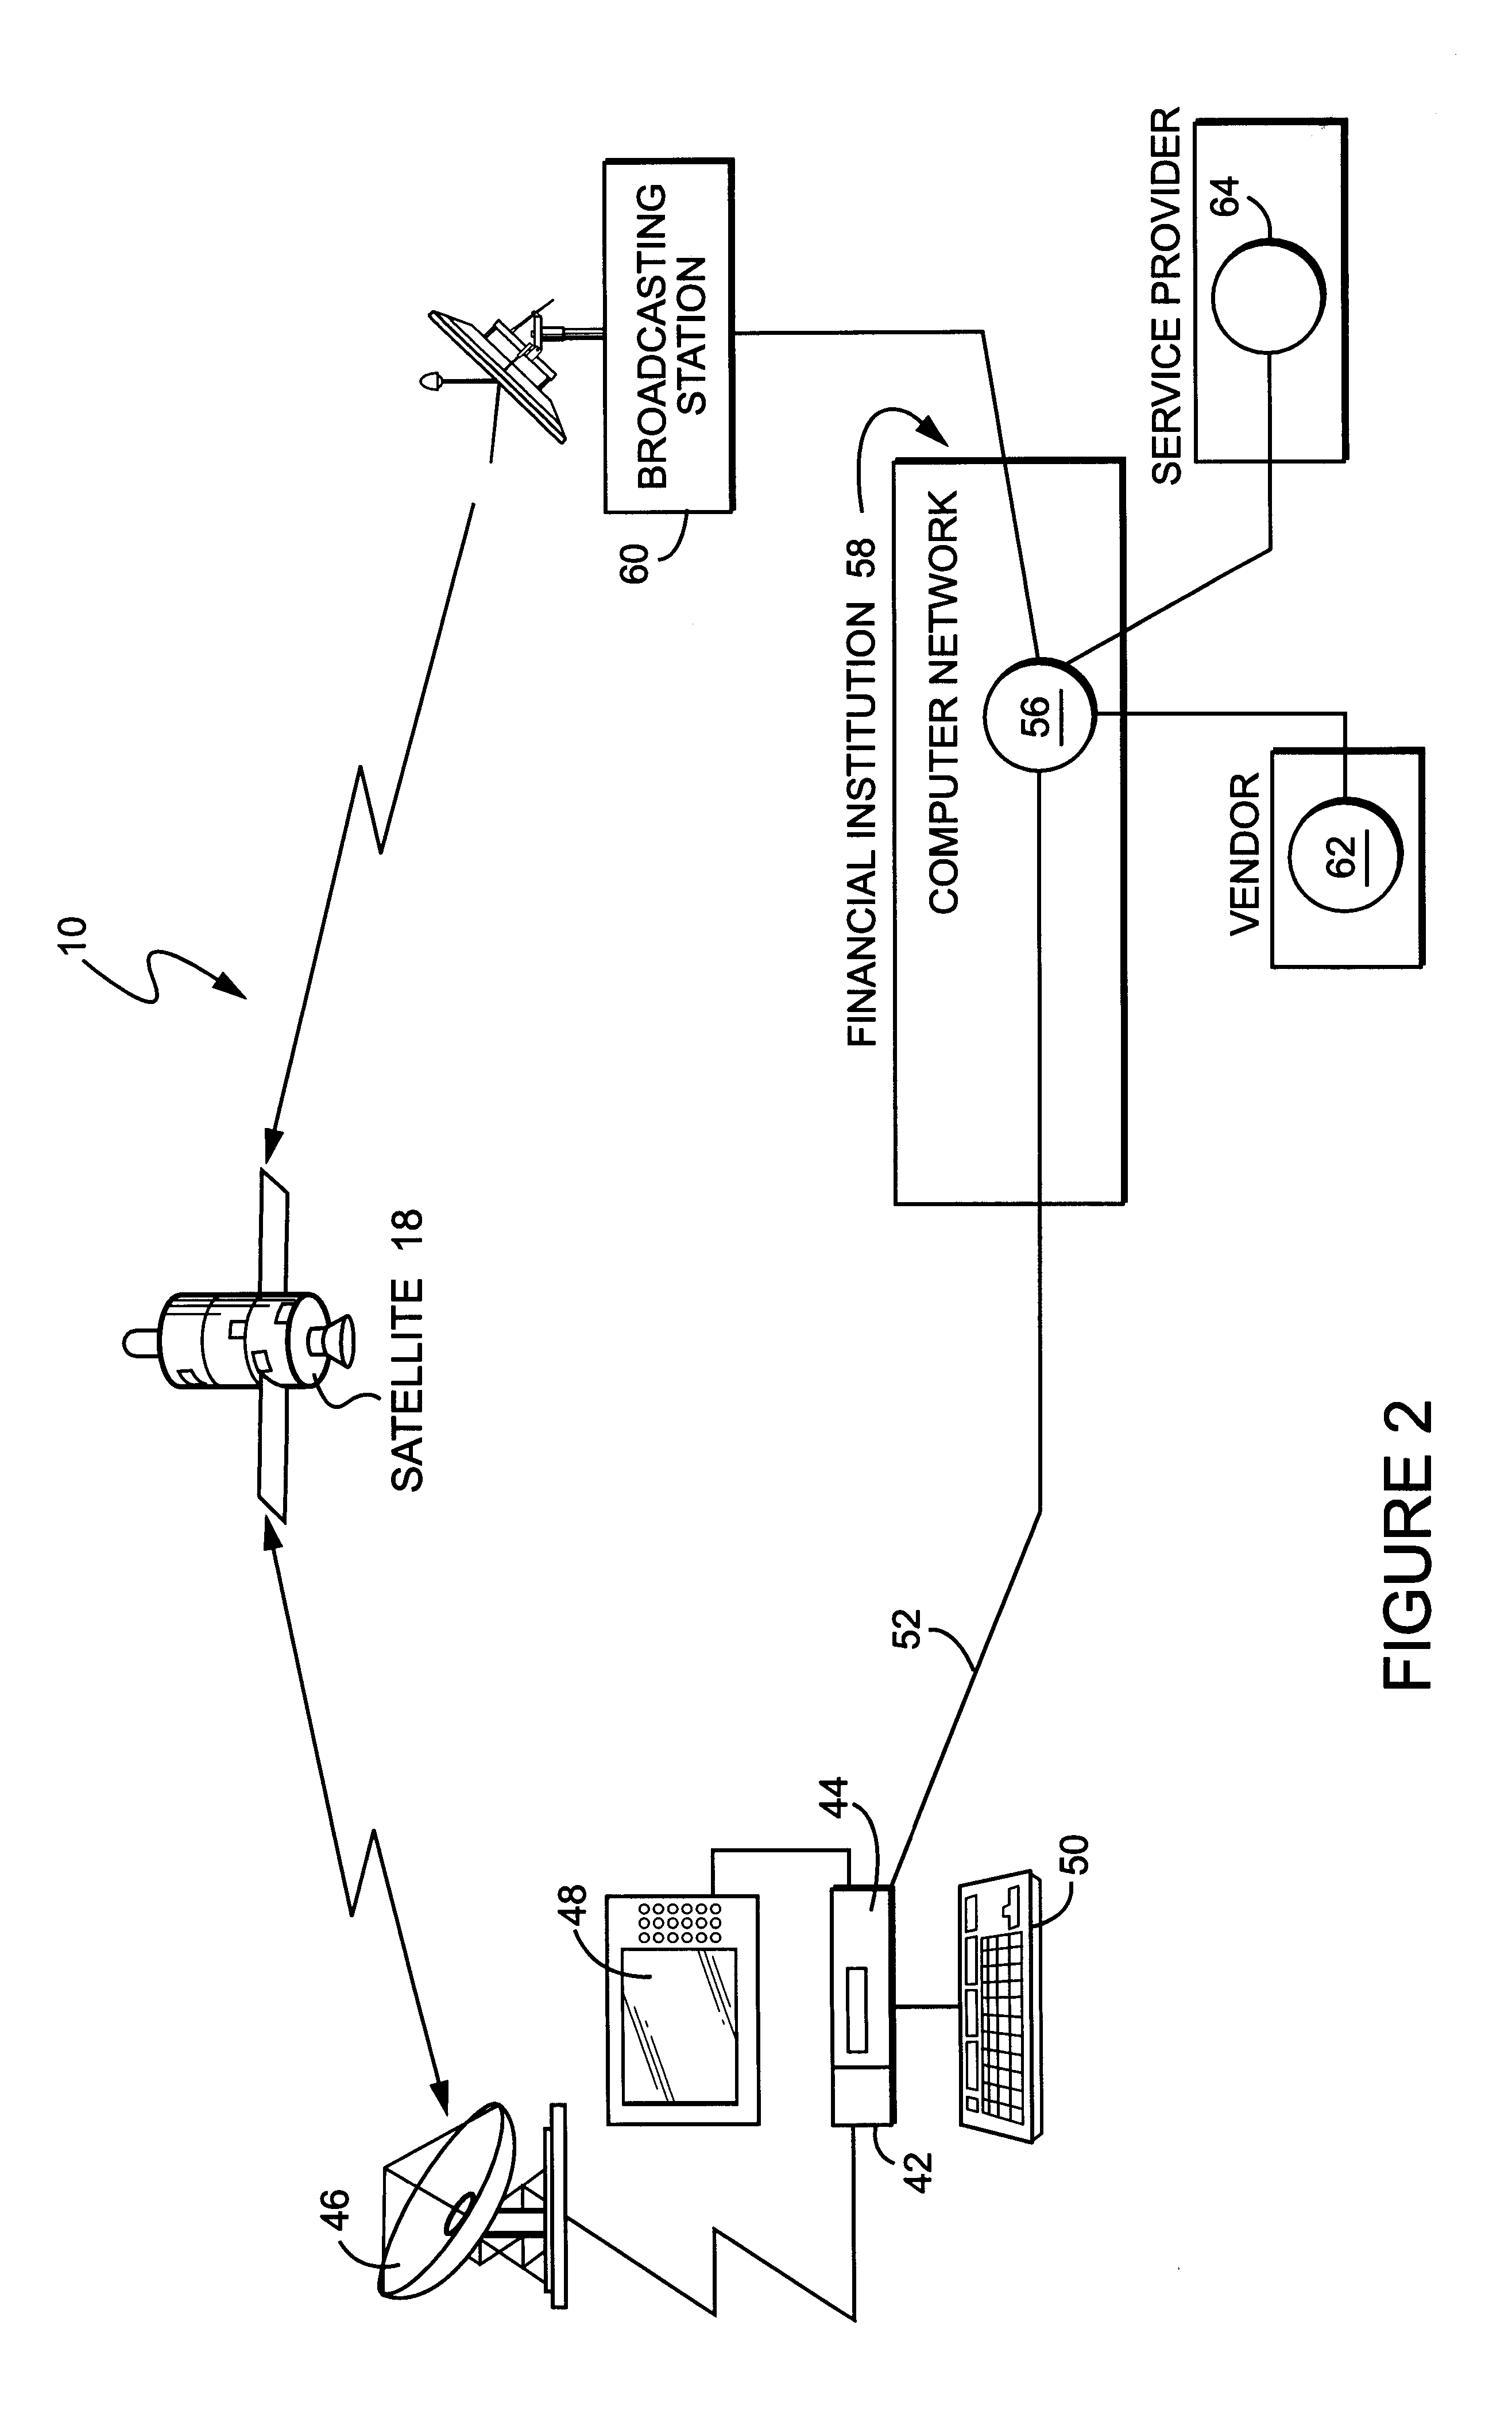 Interactive system for and method of performing financial transactions from a user base